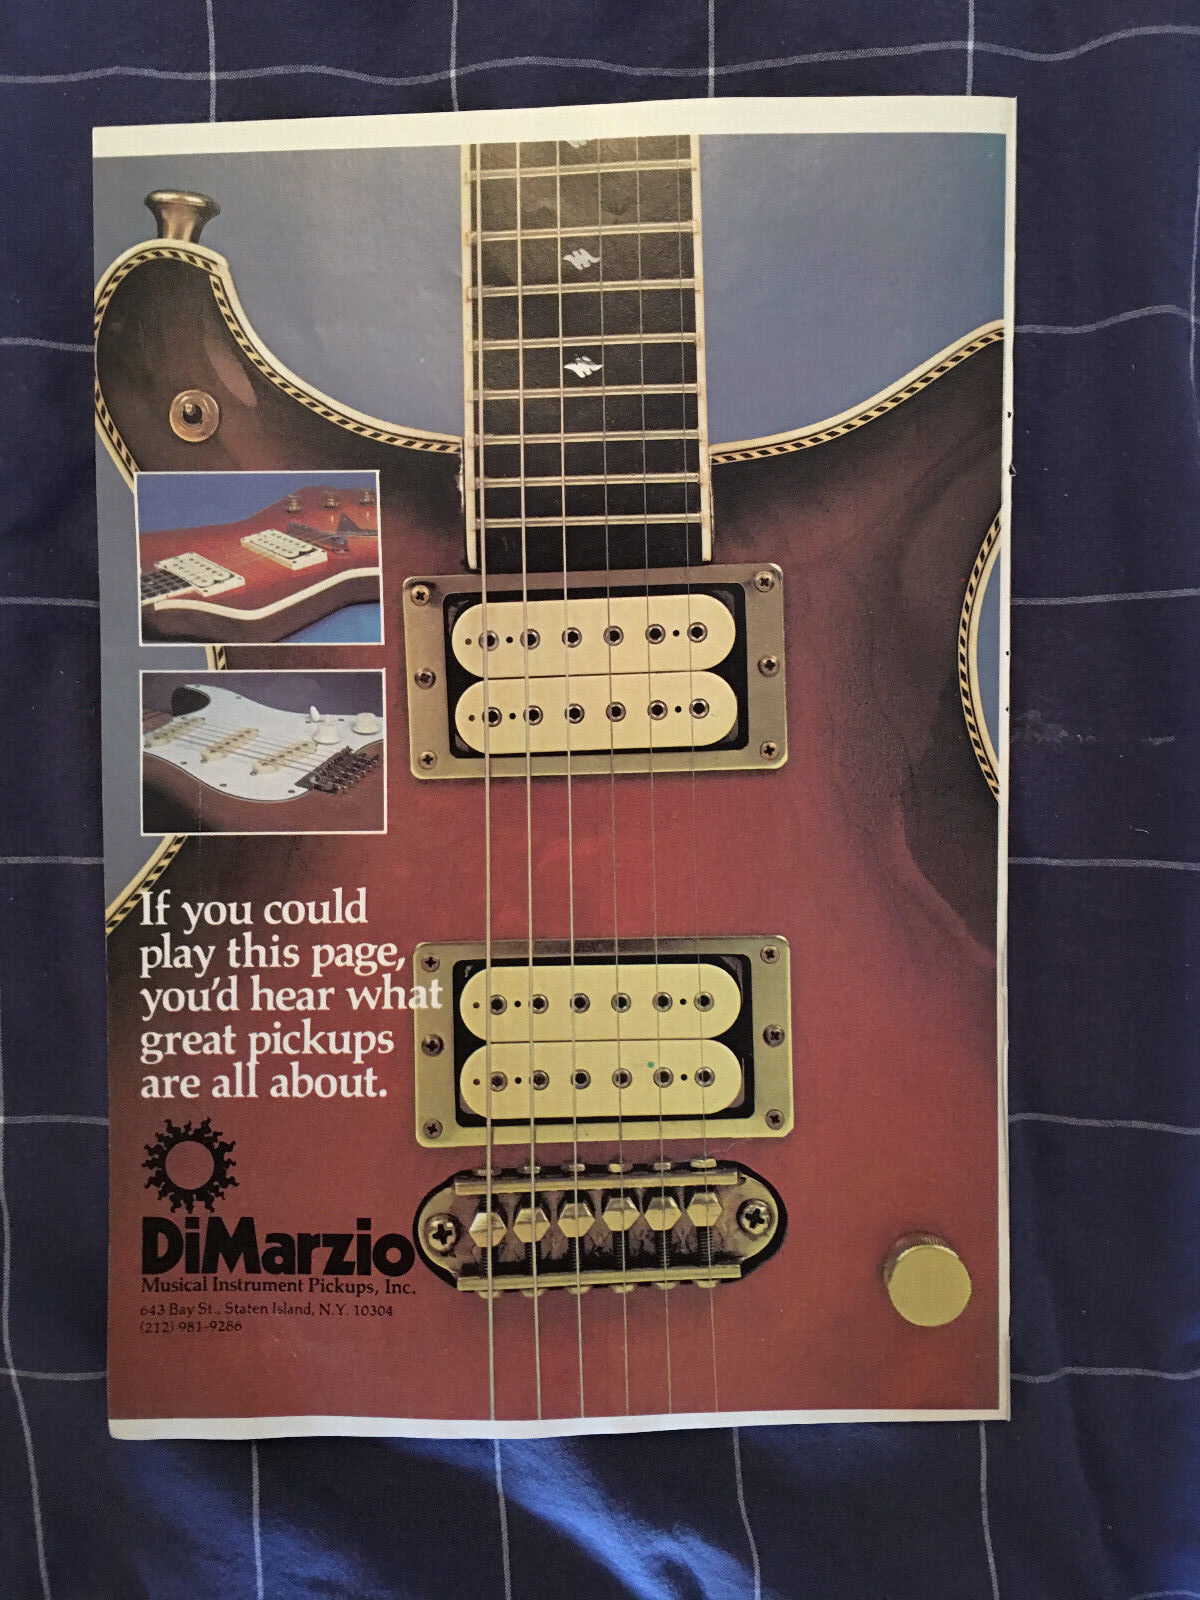 DIMARZIO PICKUPS - ORIGINAL 1978 1 PAGE PICTURE A4 ADVERT - CLIPPING/CUTTING